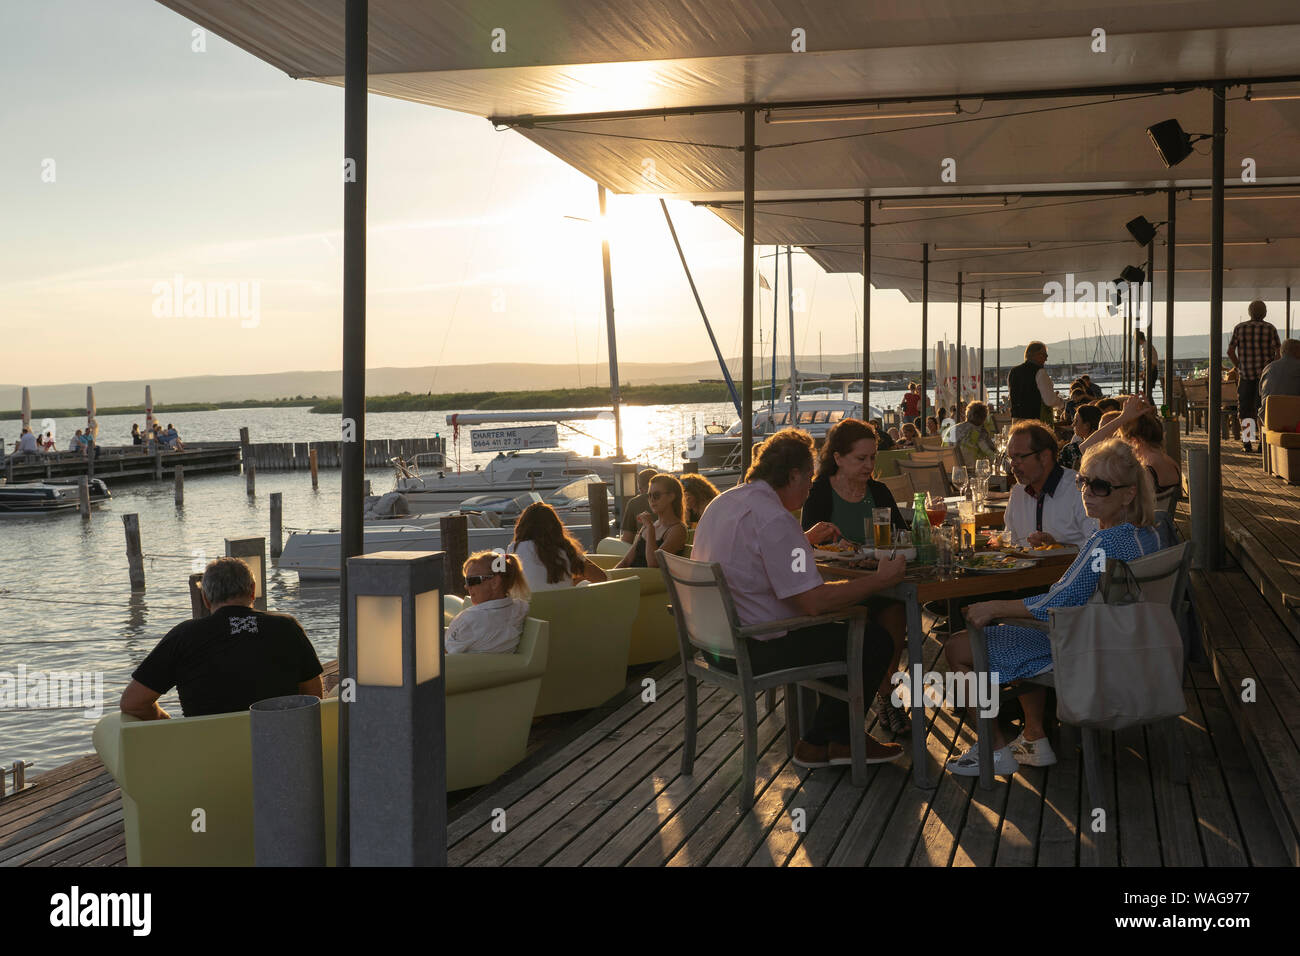 Diners at the Mole West bar and restaurant enjoying the sun setting and the views across Neusiedle See, a popular tourist destination in Burgenland Stock Photo